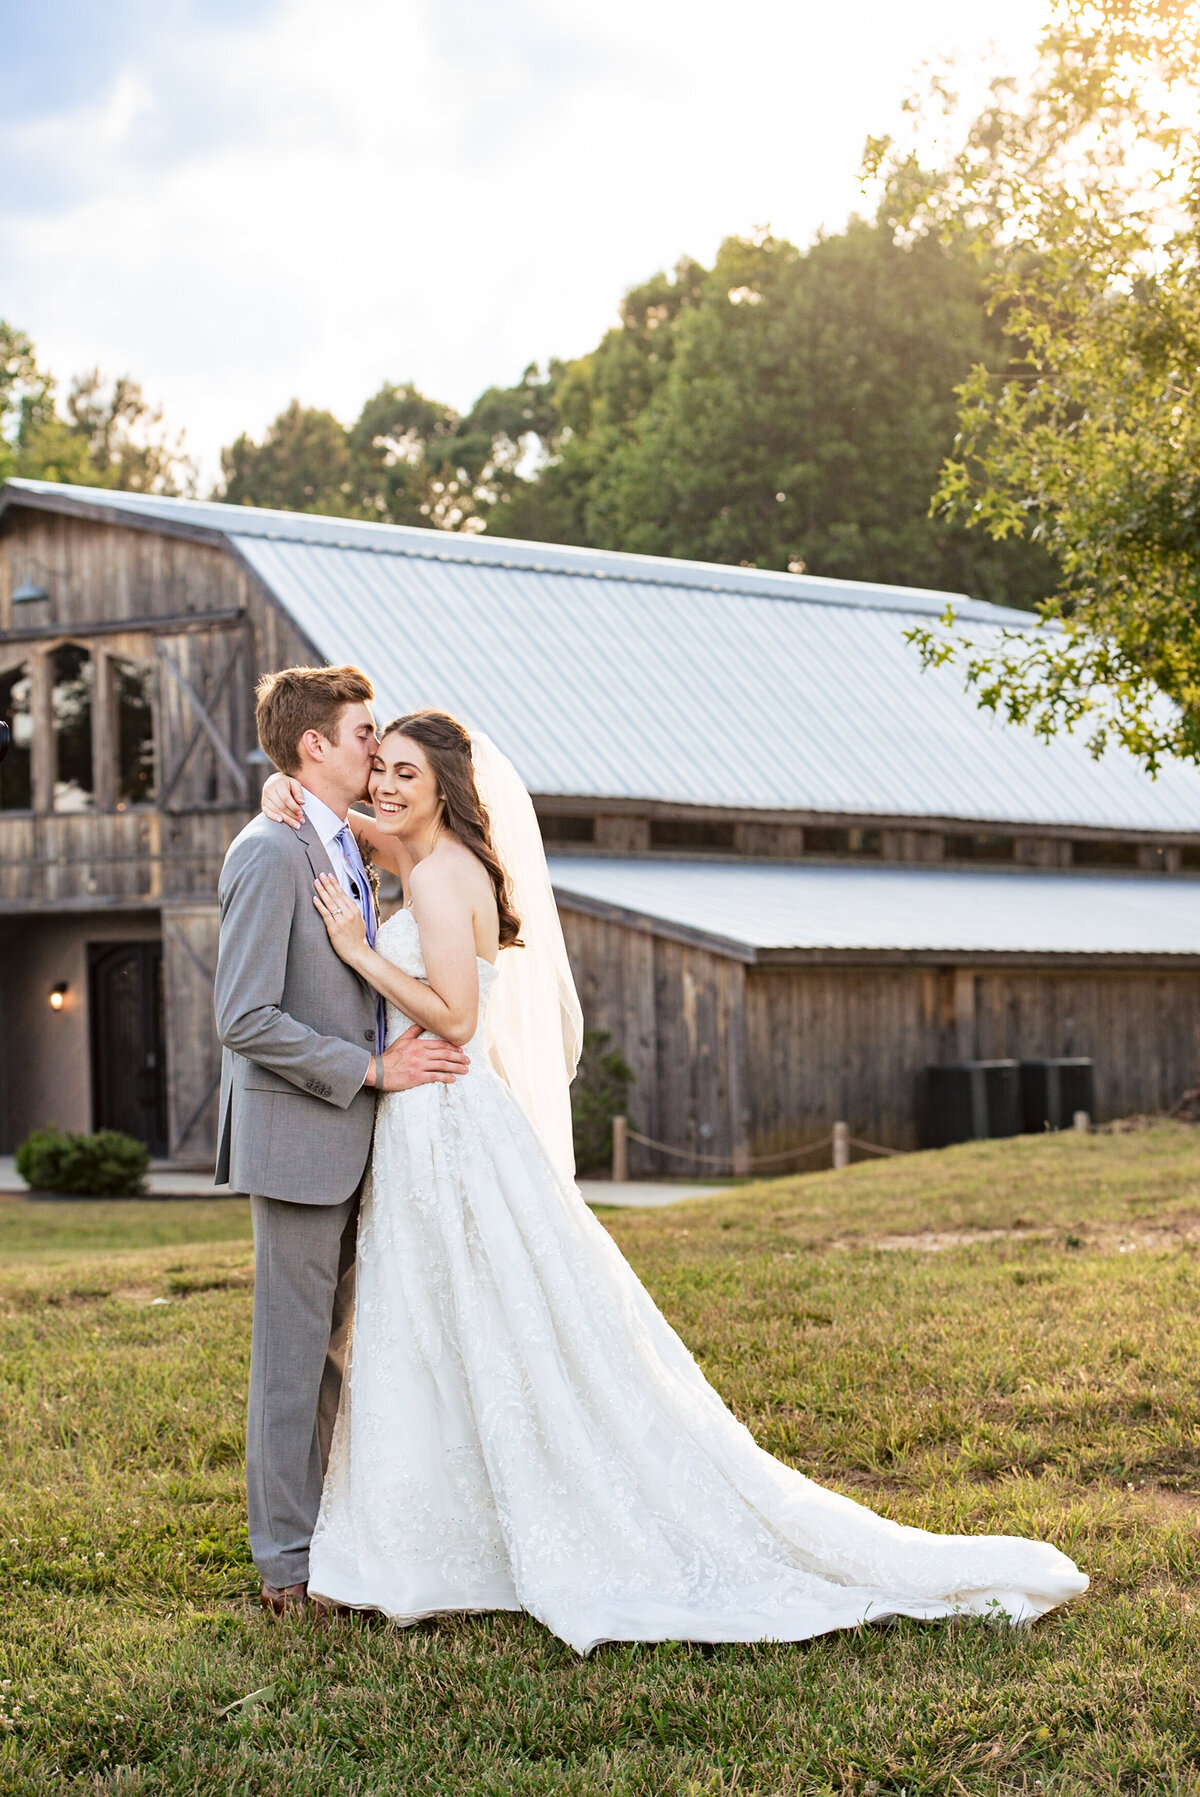 Outdoor portrait of bride giggling as groom kisses her temple during sunset showing the barn in the background at Lady Bird Farms by Charlotte Wedding Photographers DeLong Photography